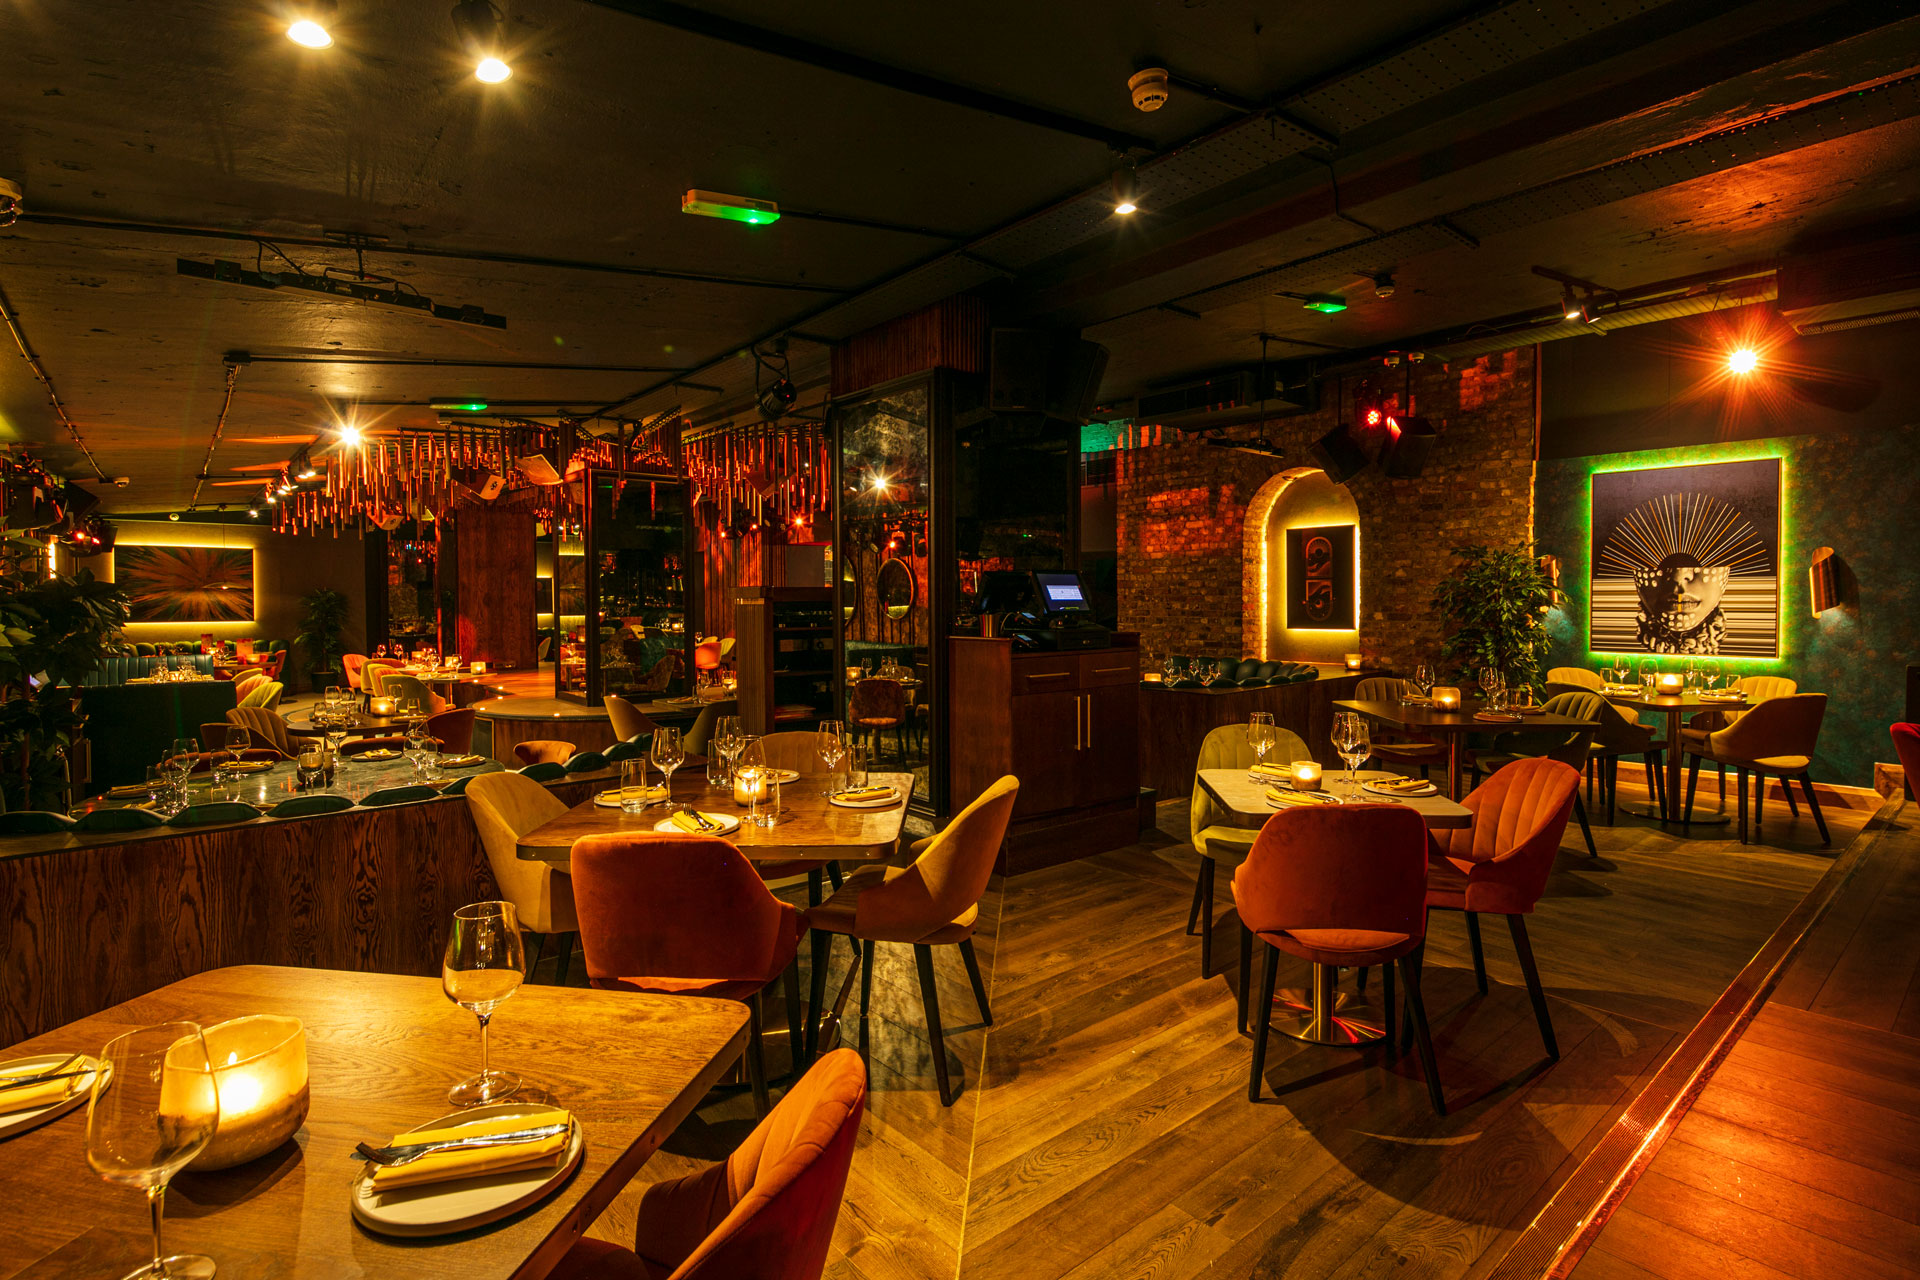 Inca restaurant tables and seats in low lit interior